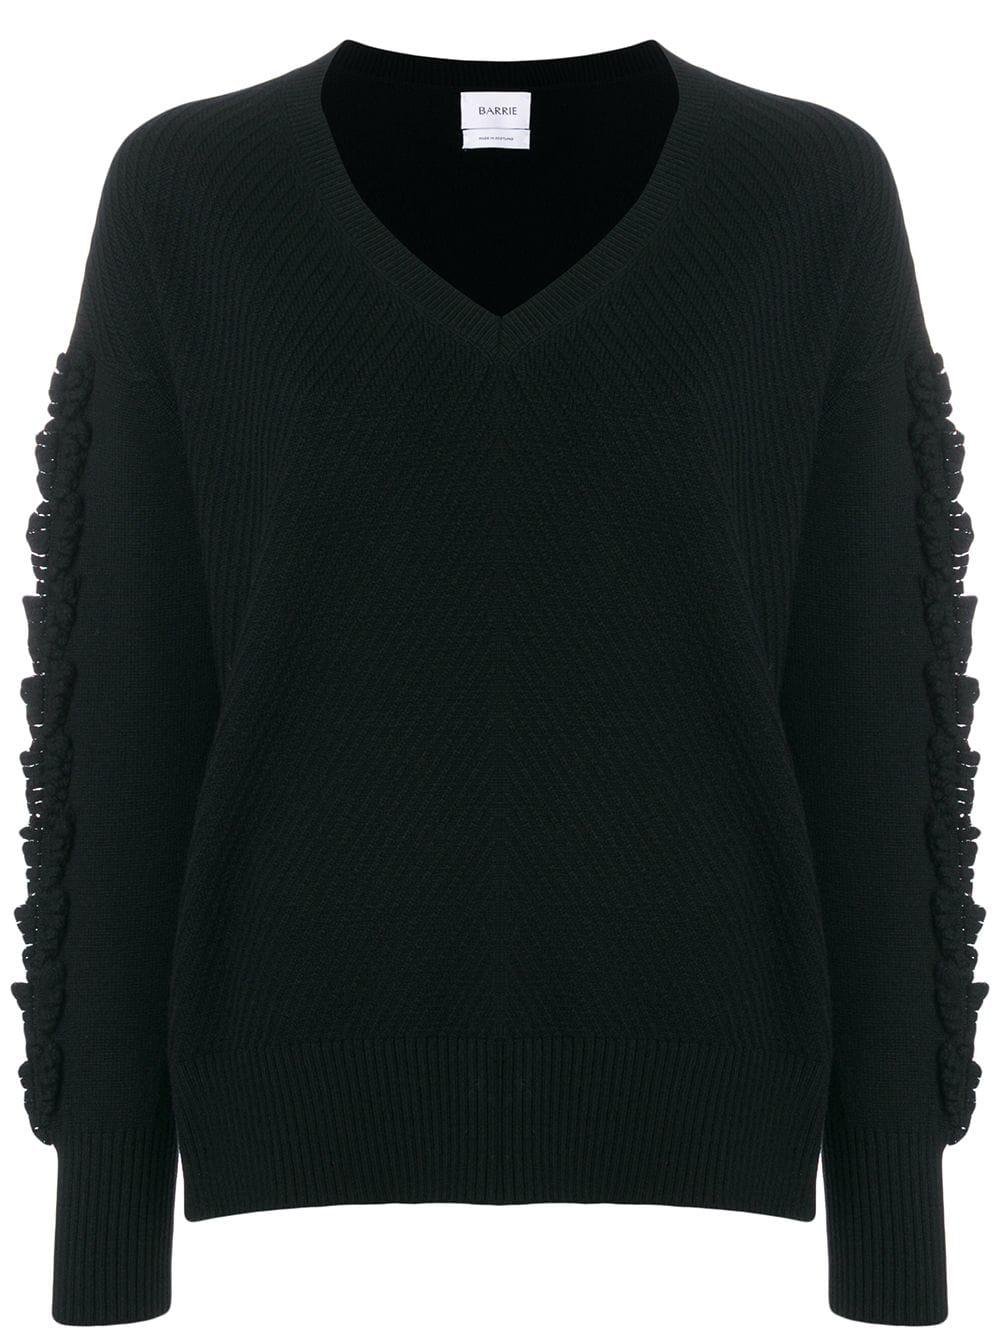 Troisieme Dimension cashmere V-neck pullover by BARRIE